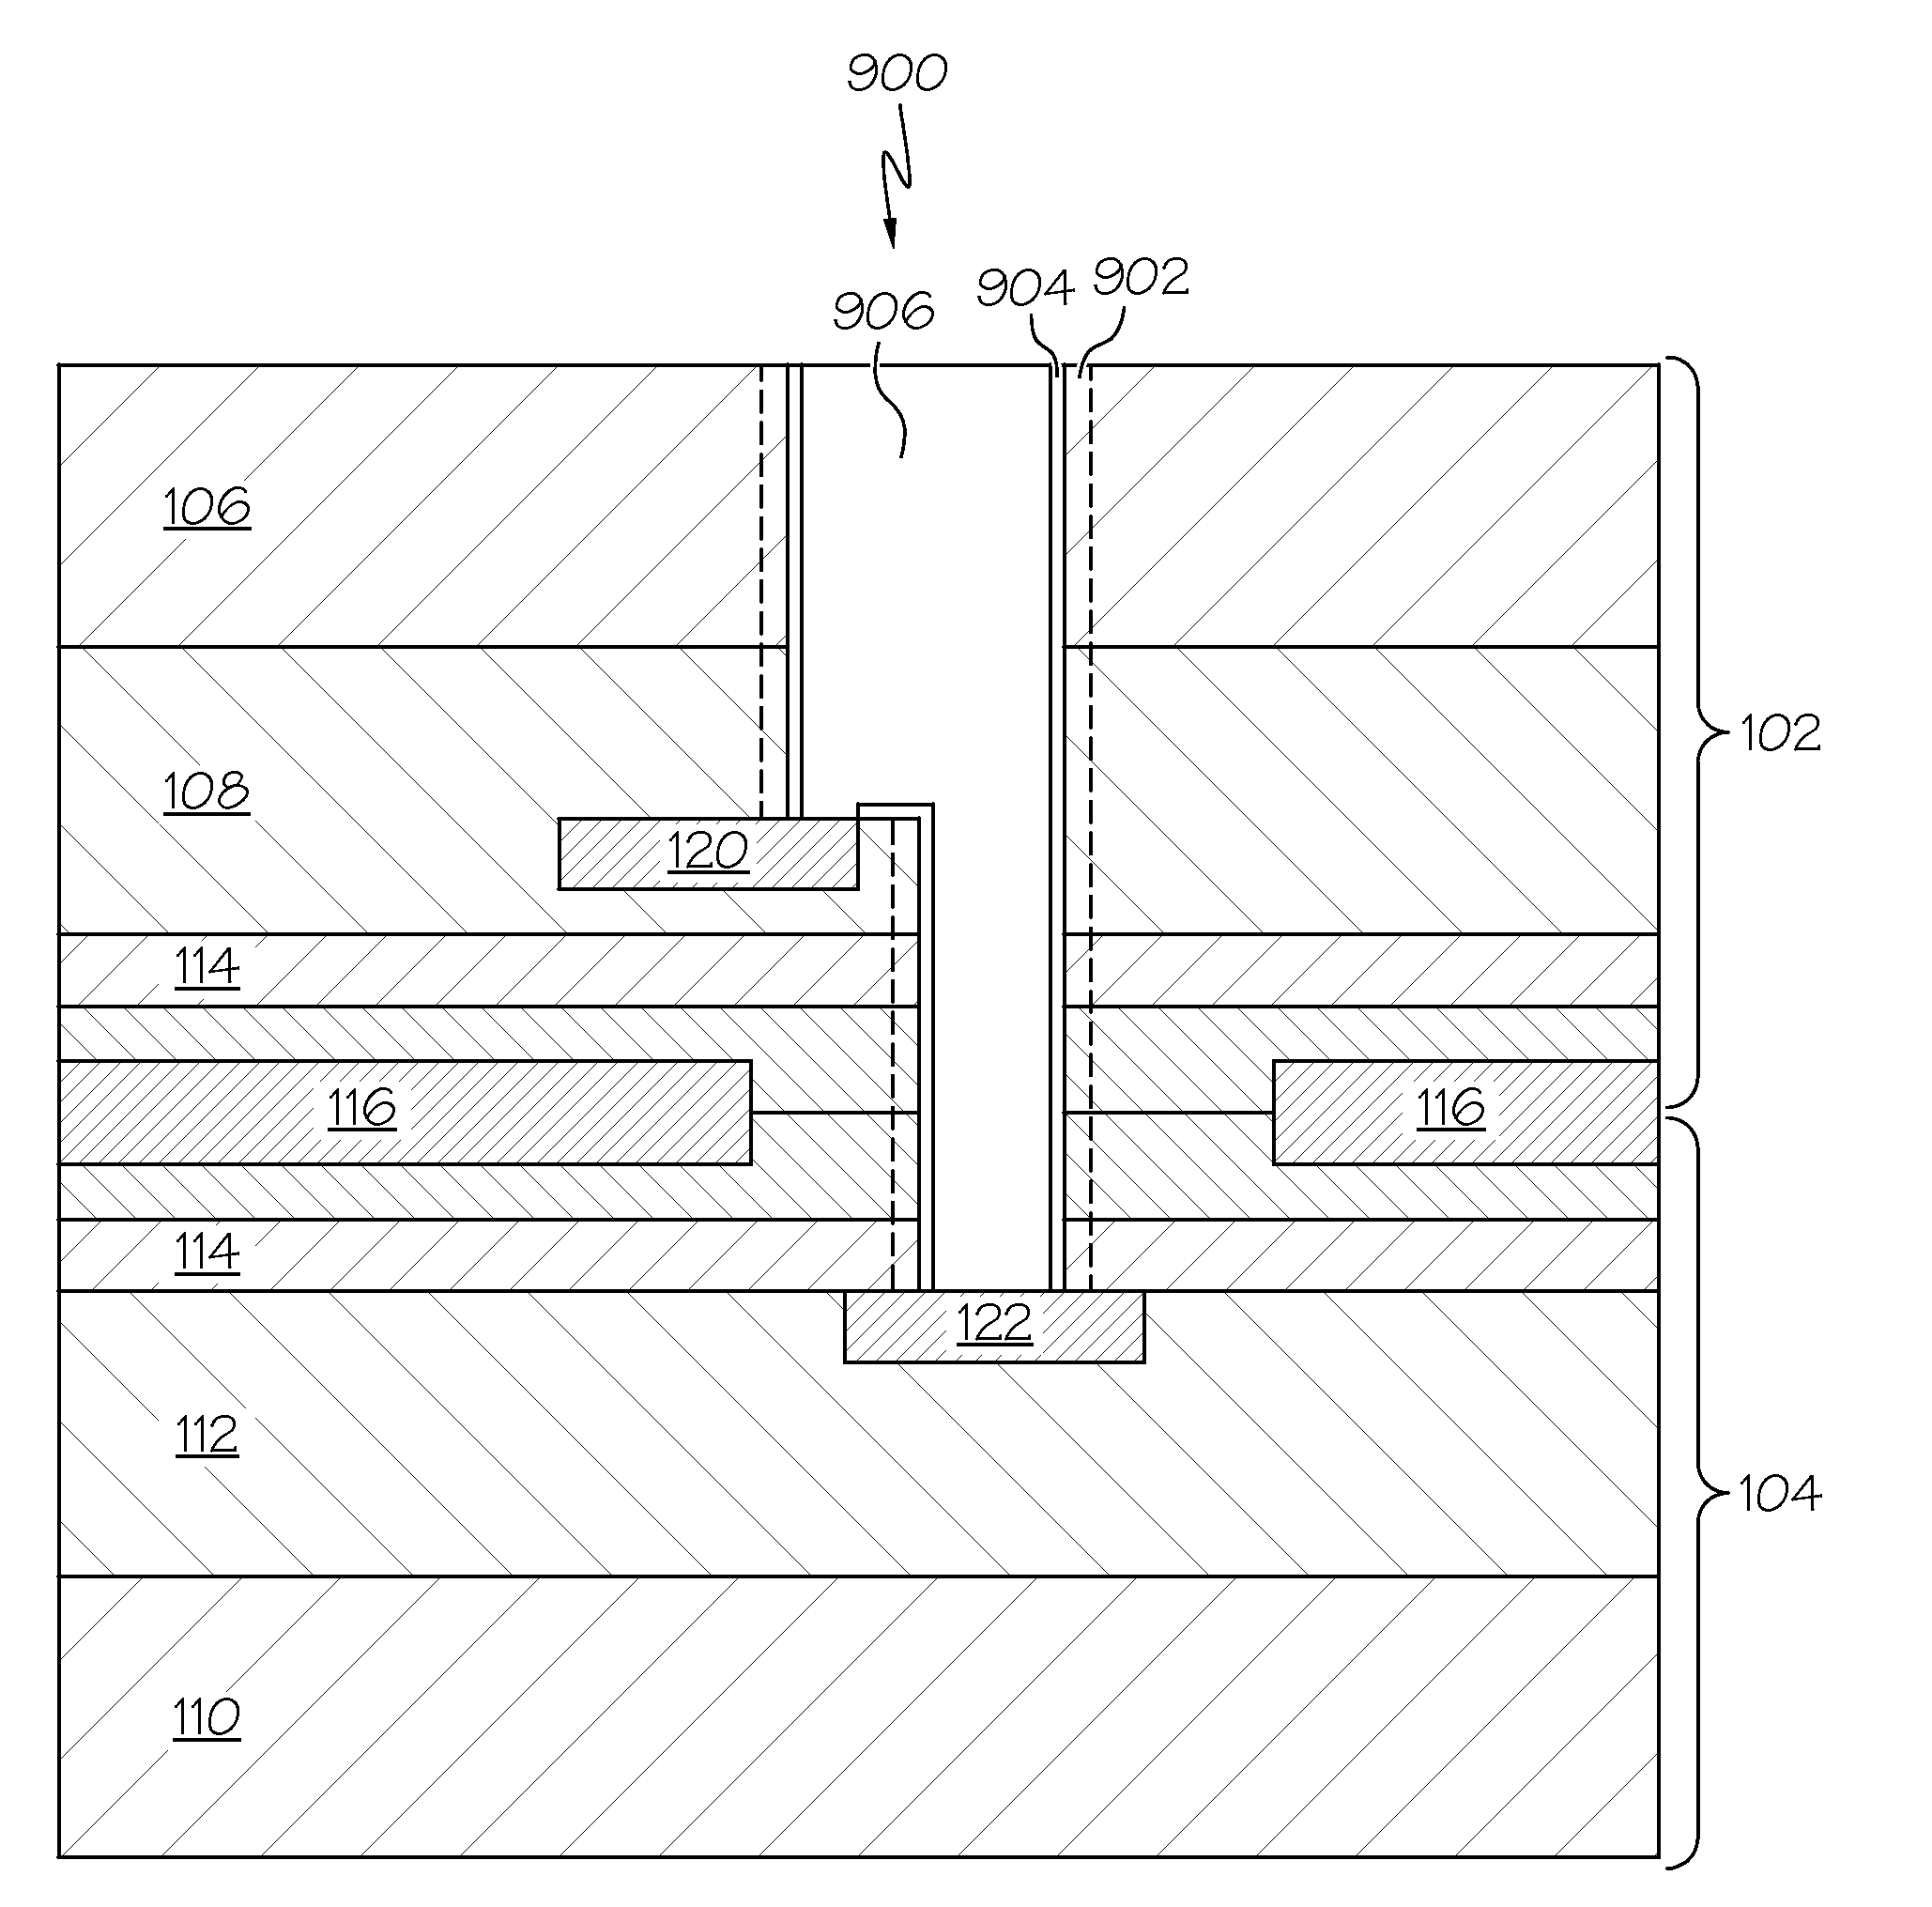 Three Dimensional Integration and Methods of Through Silicon Via Creation